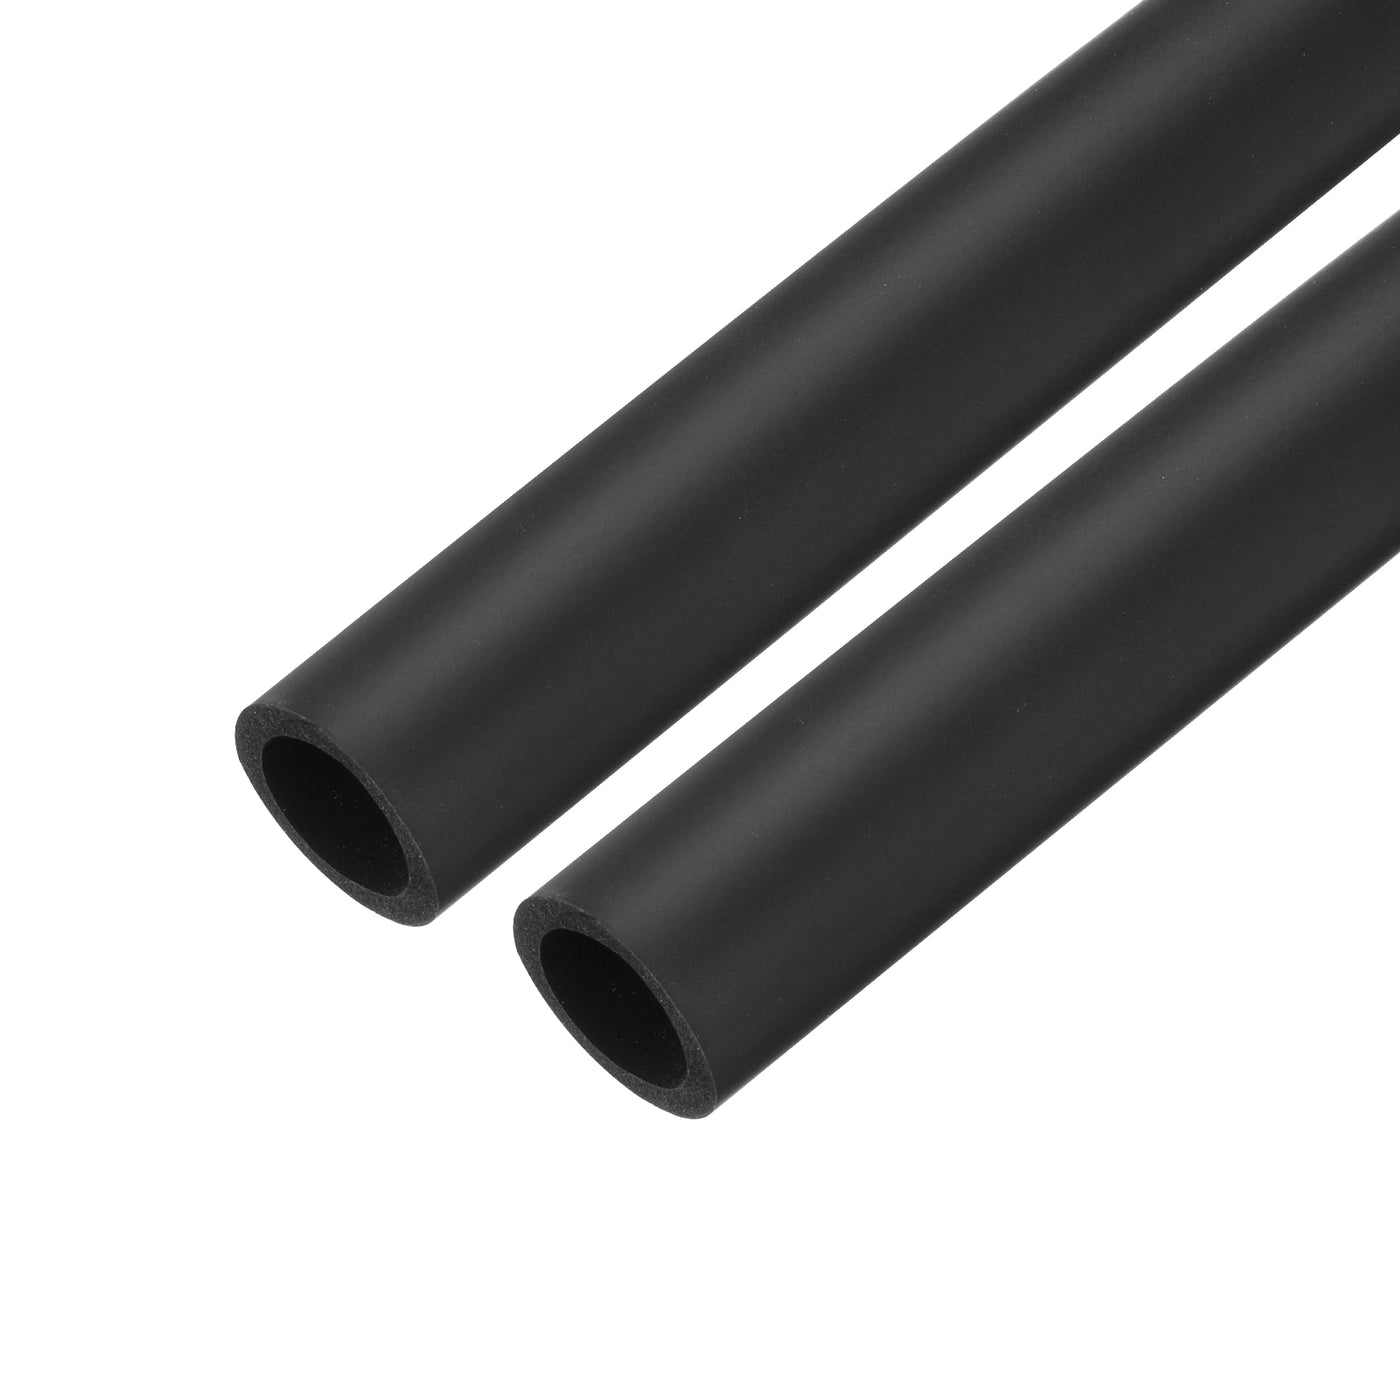 uxcell Uxcell 2pcs 3.3ft Pipe Insulation Tube 7/8 Inch(22mm) ID 32mm OD Foam Tubing for Handle Grip Support, Black